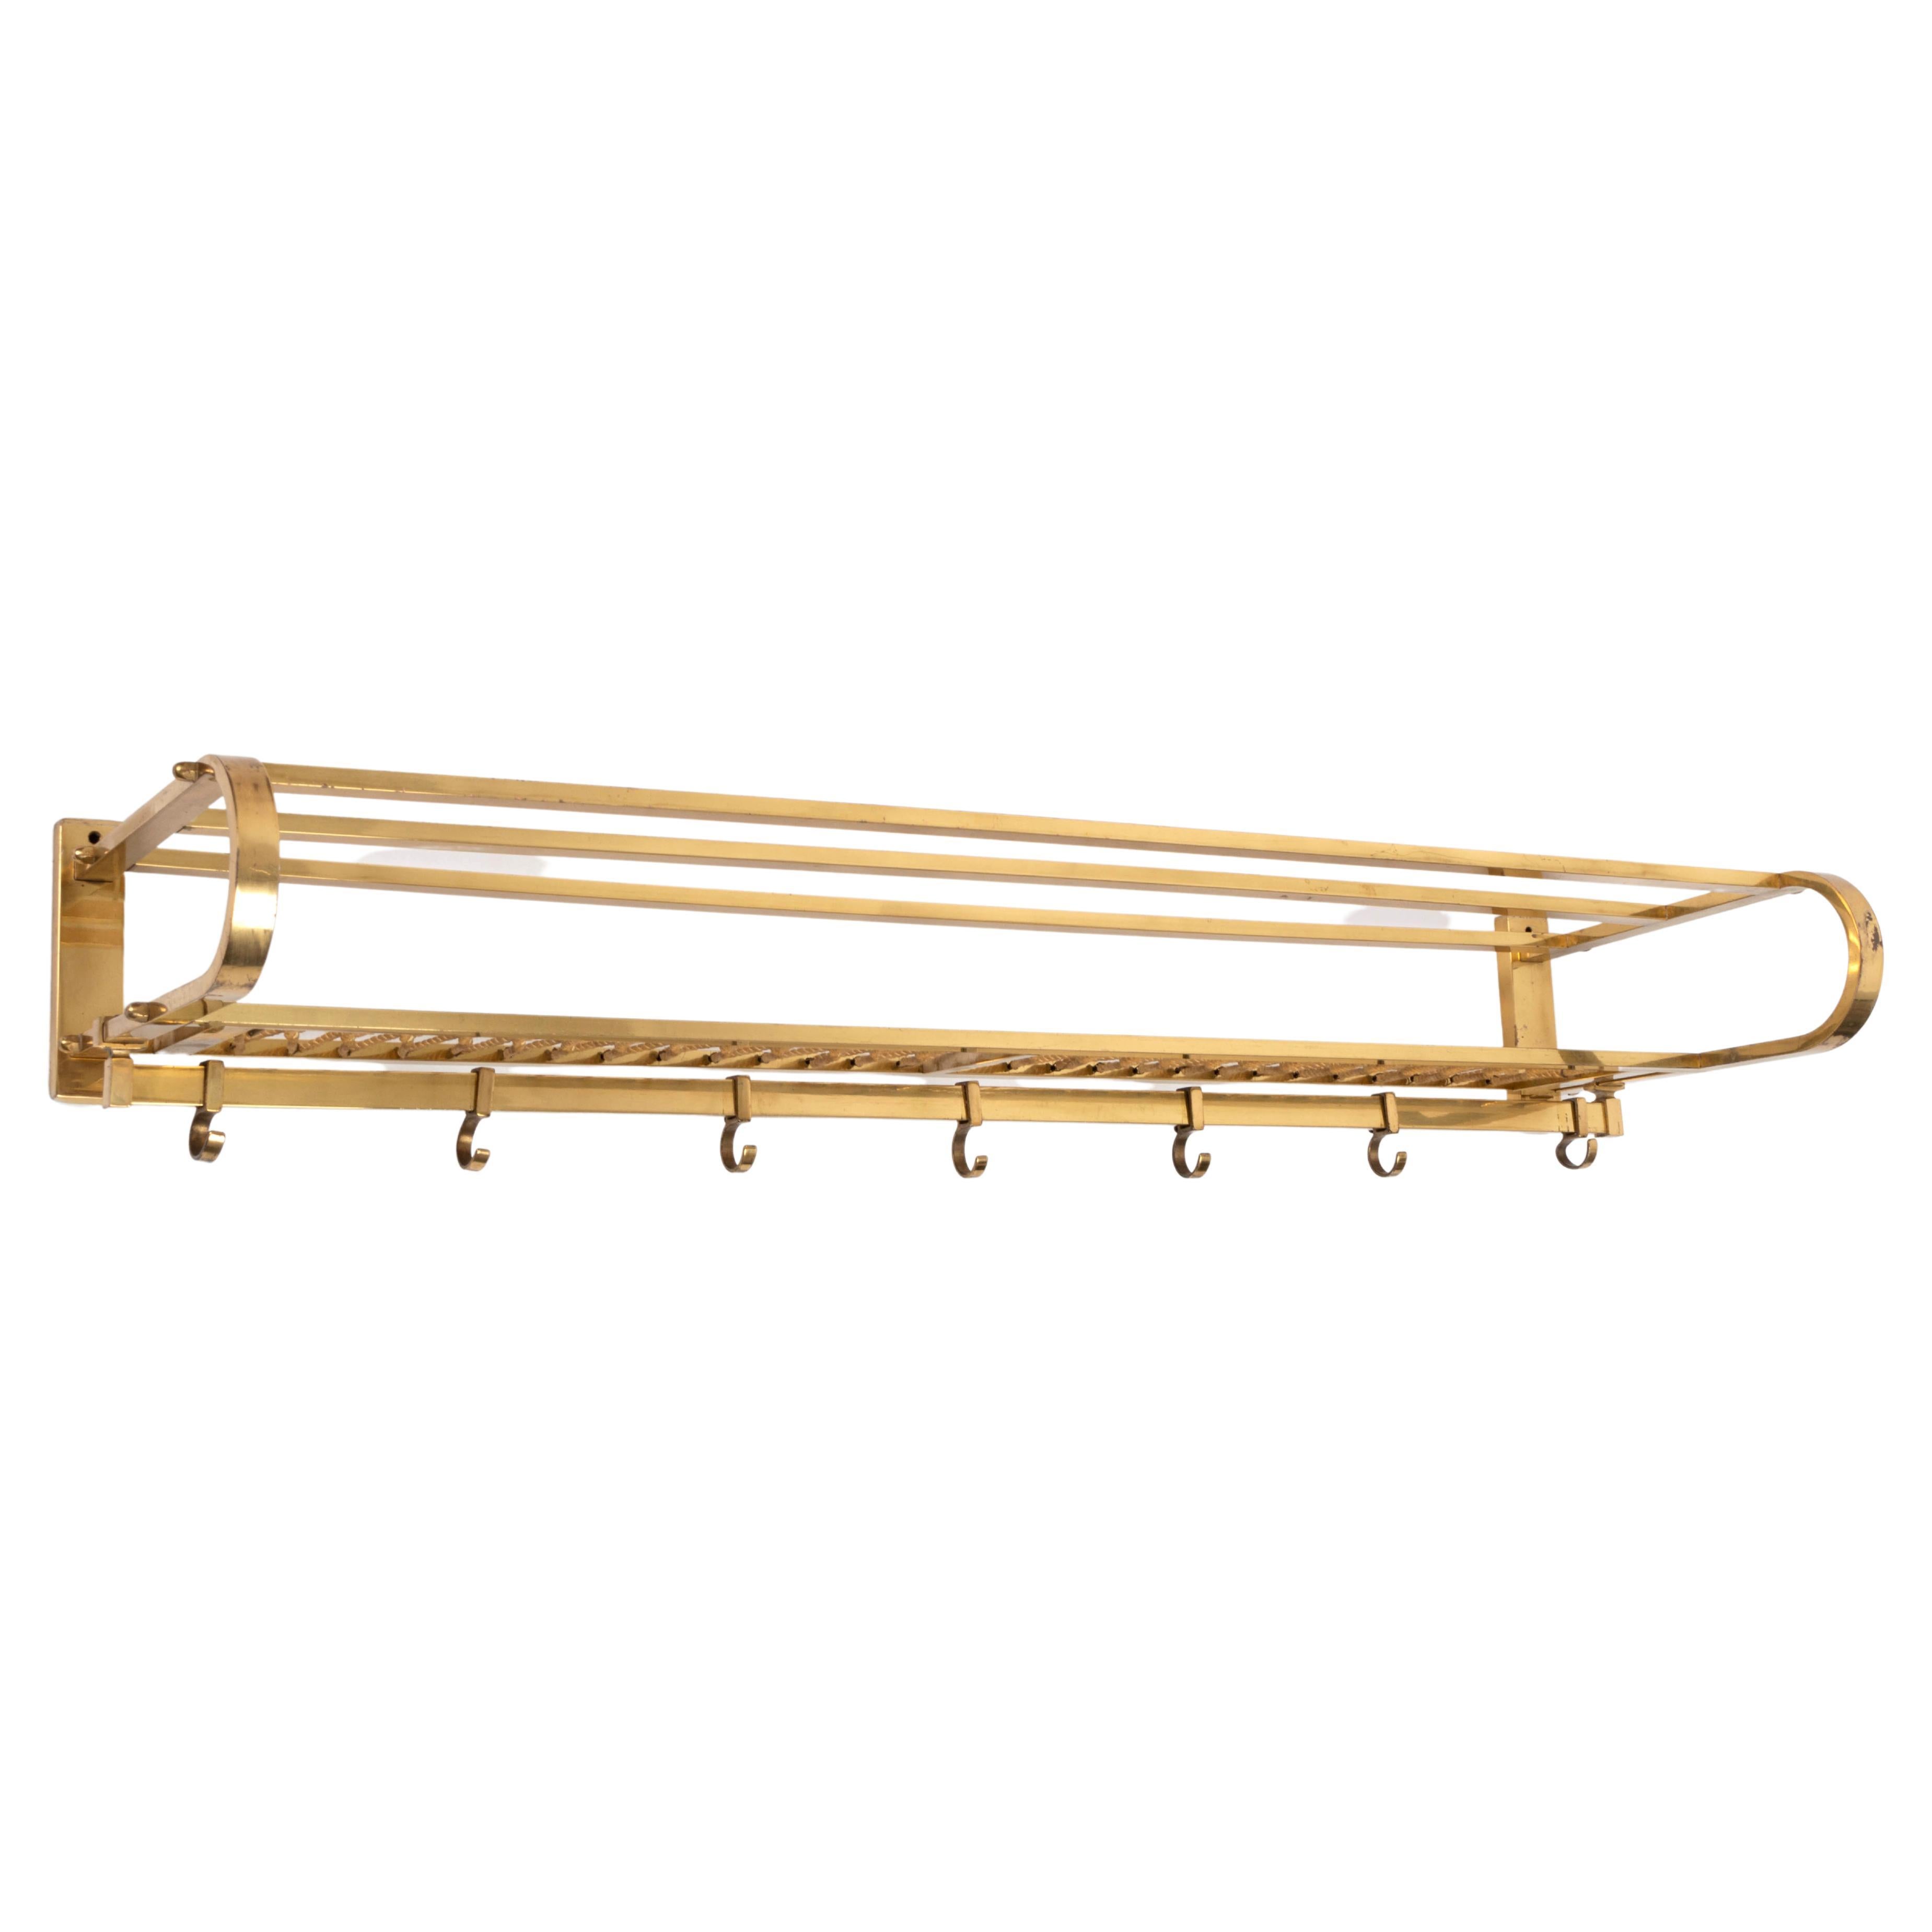 Art Deco French Modernist Brass Coat Rack & Rail 
La Maison Desny C.1920

A large French brass coat rack, fitted with a hanging rail and seven adjustable hooks. Excellent condition commensurate with age.

Measures: 99cm wide 15cm deep 32cm high.